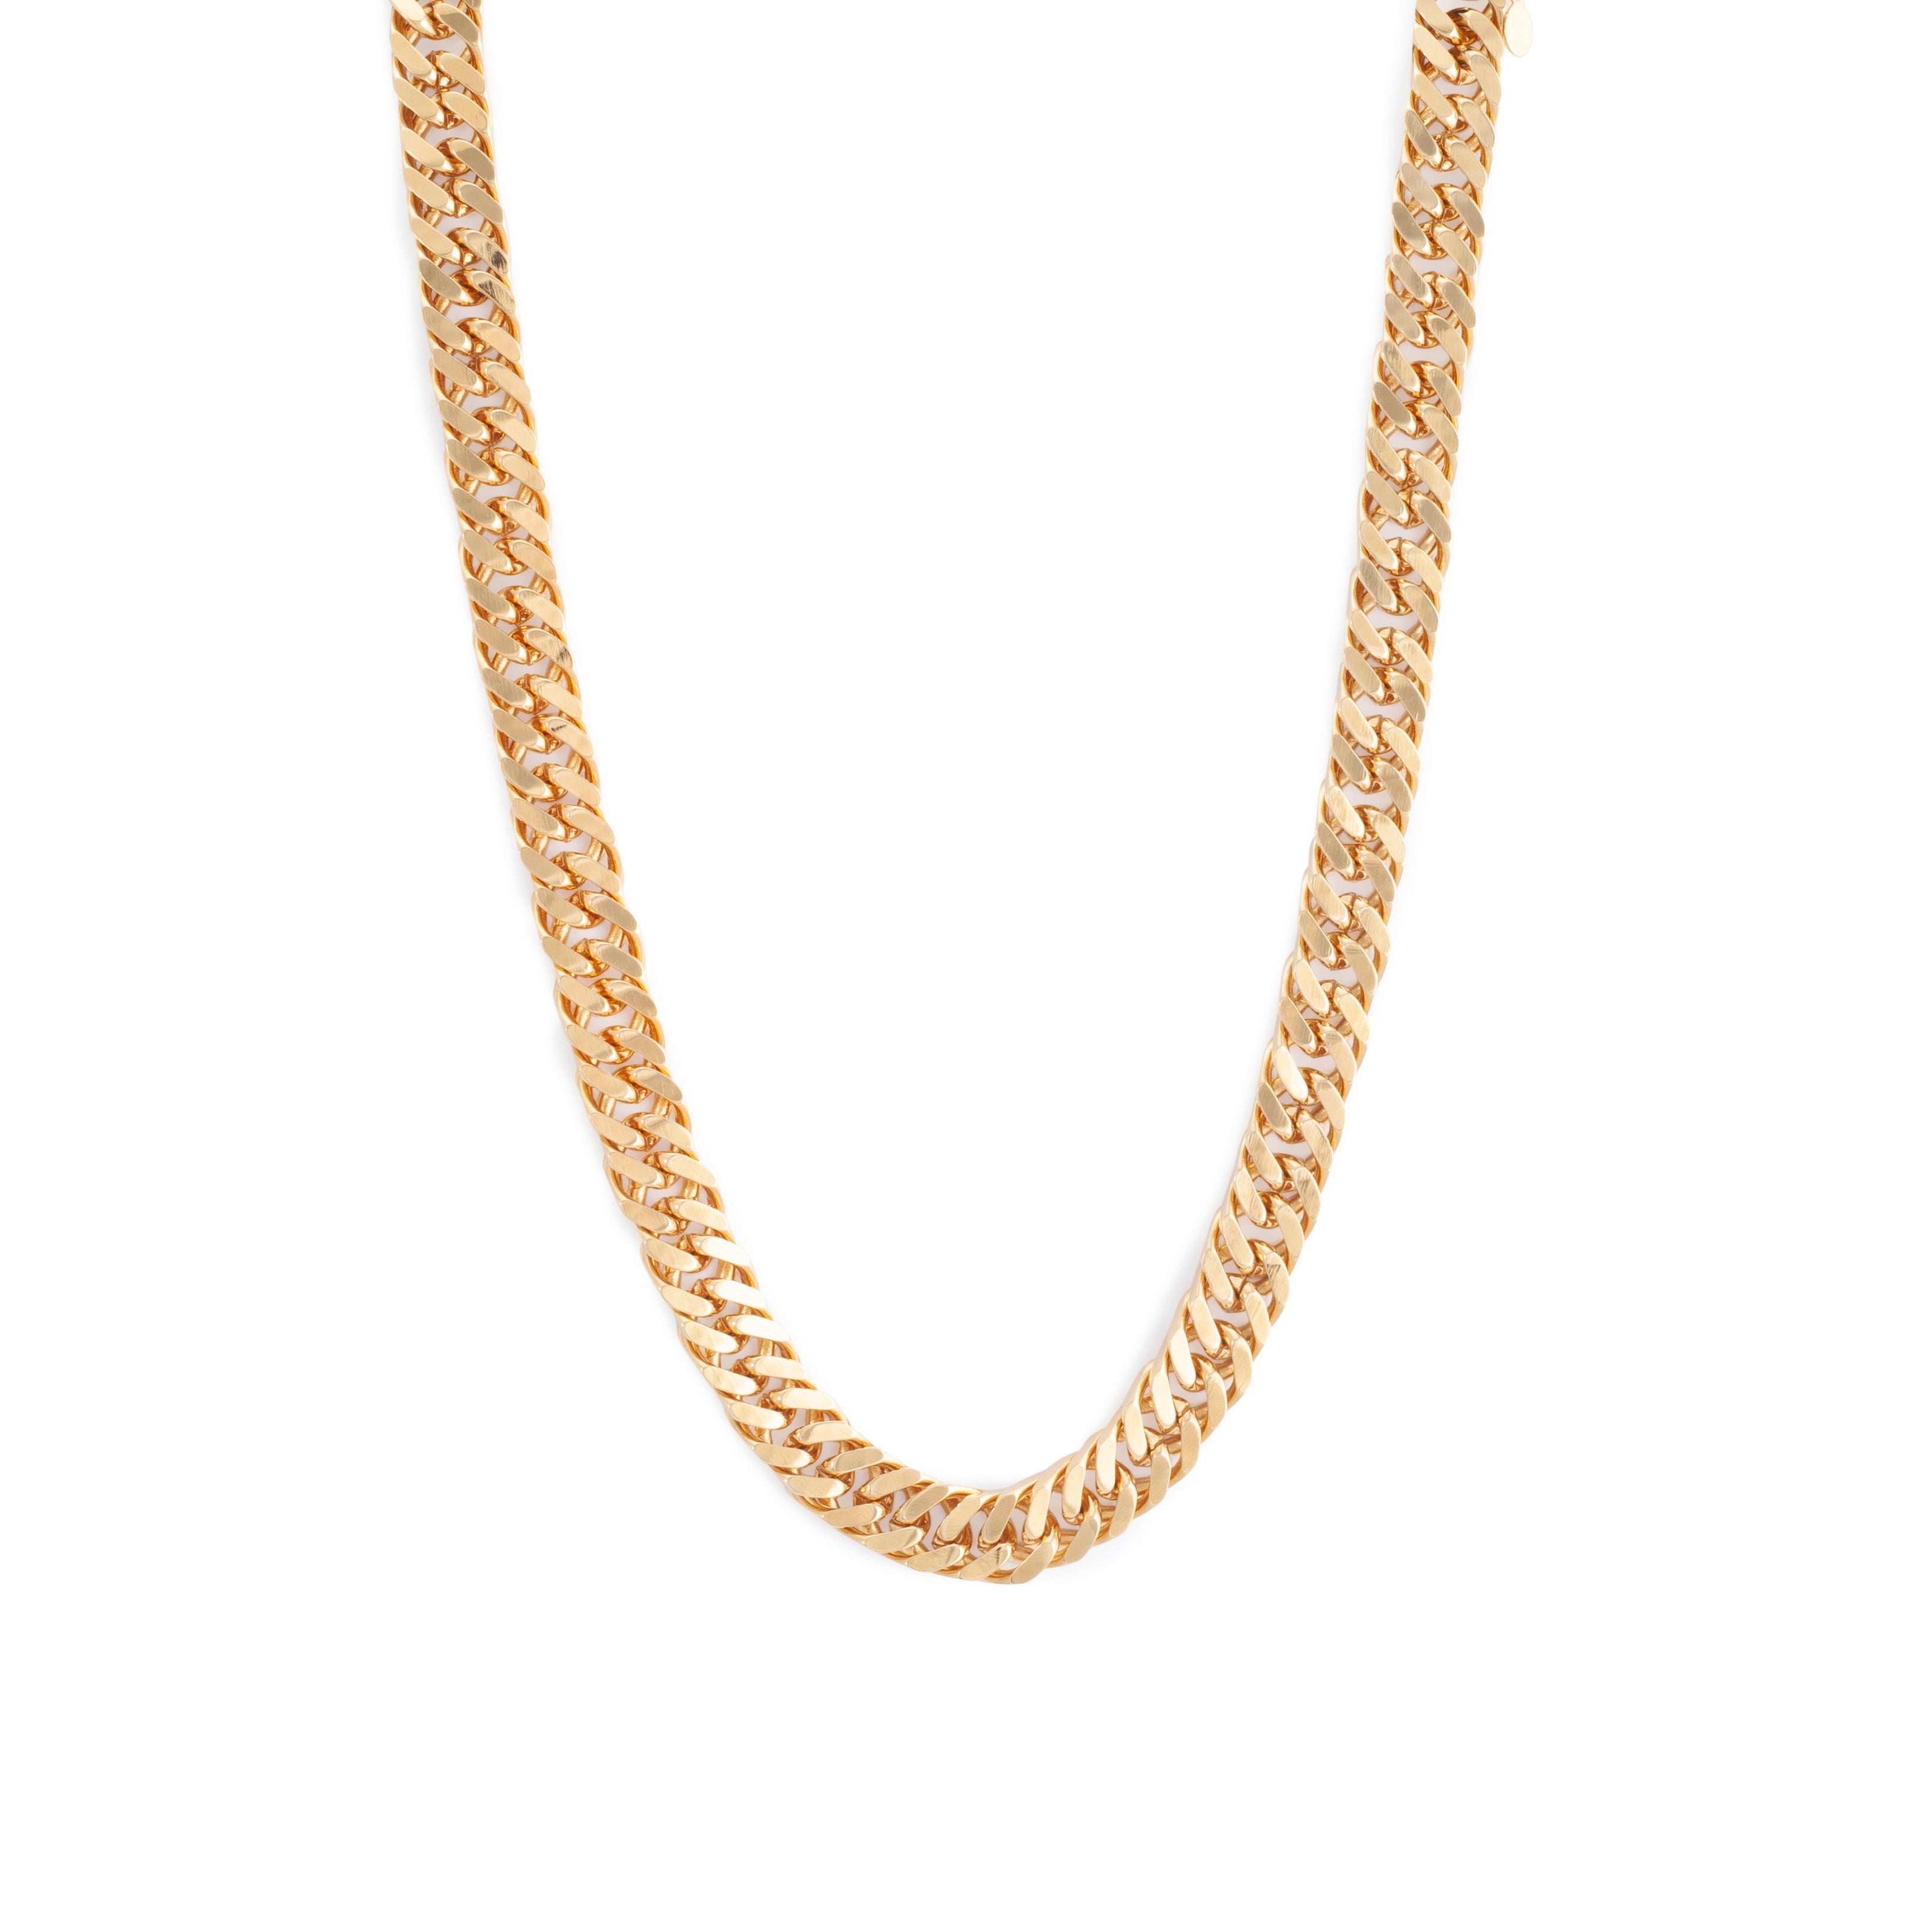 14k gold-plated statement necklace with thick chain